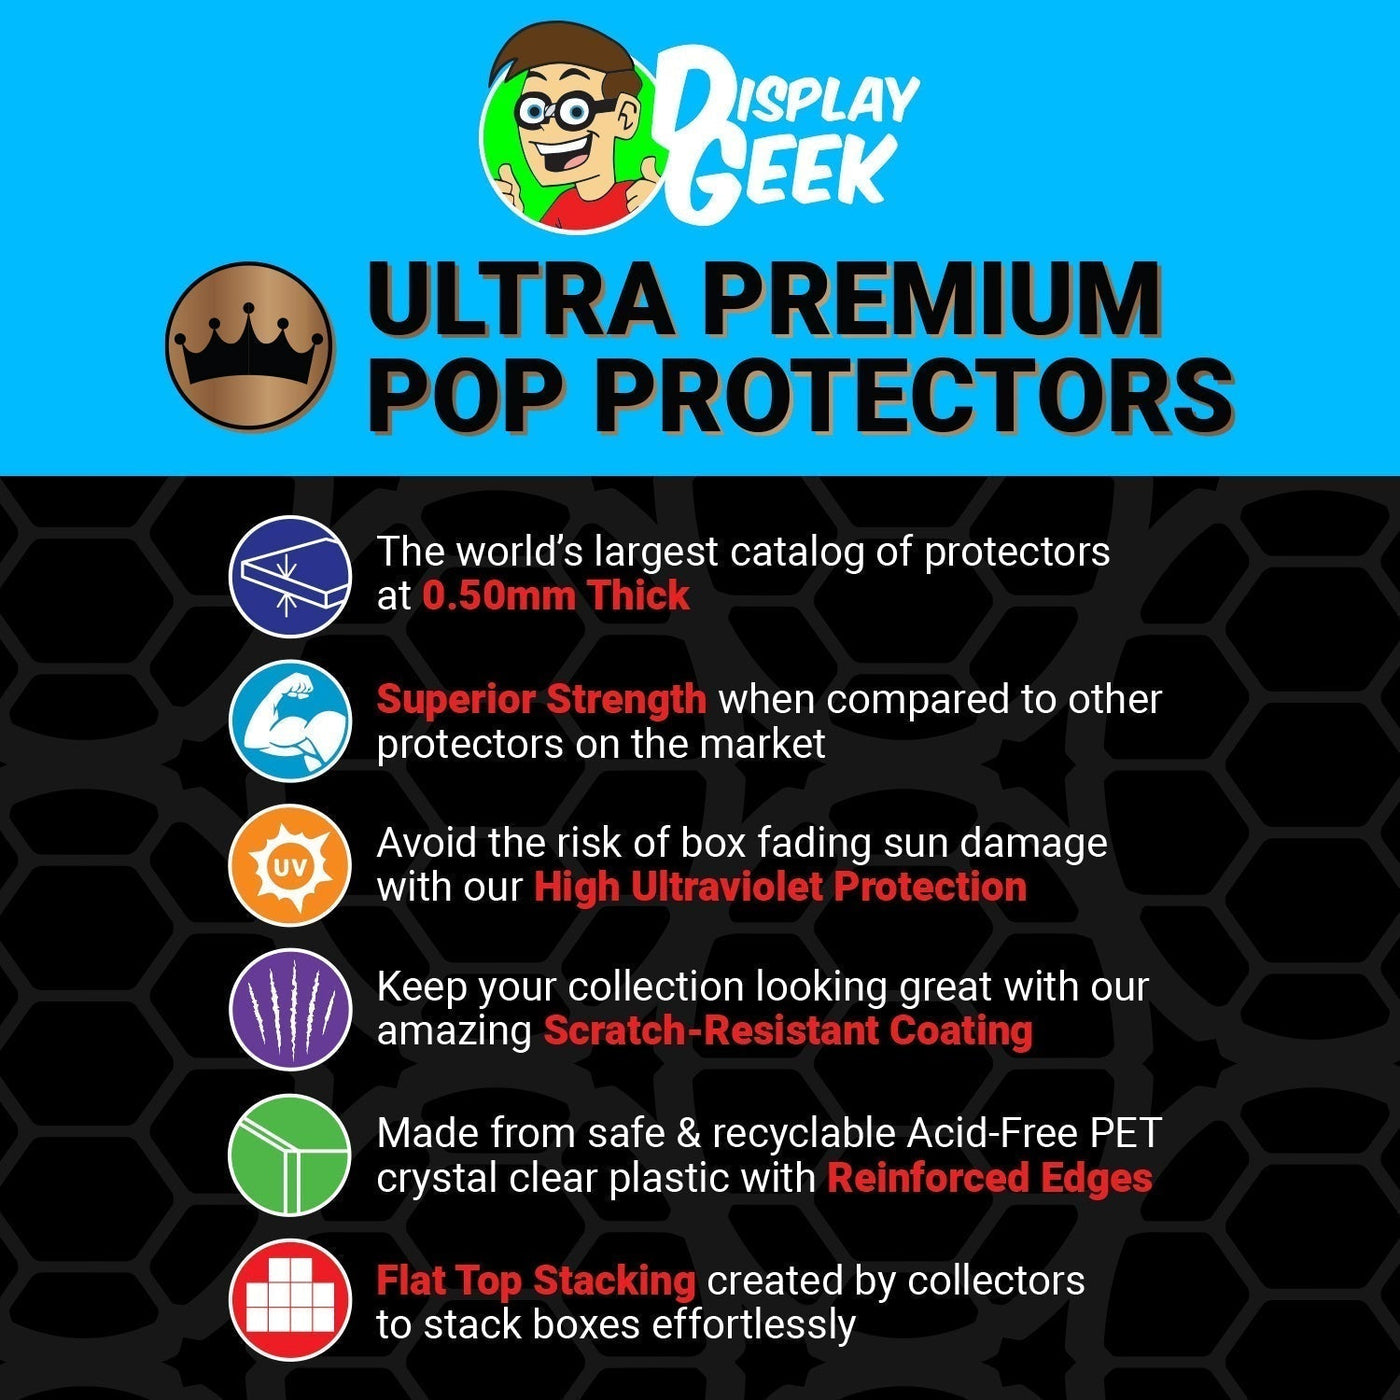 Pop Protector for One Piece Luffy with Thousand Sunny CCXP #114 Funko Pop Rides on The Protector Guide App by Display Geek